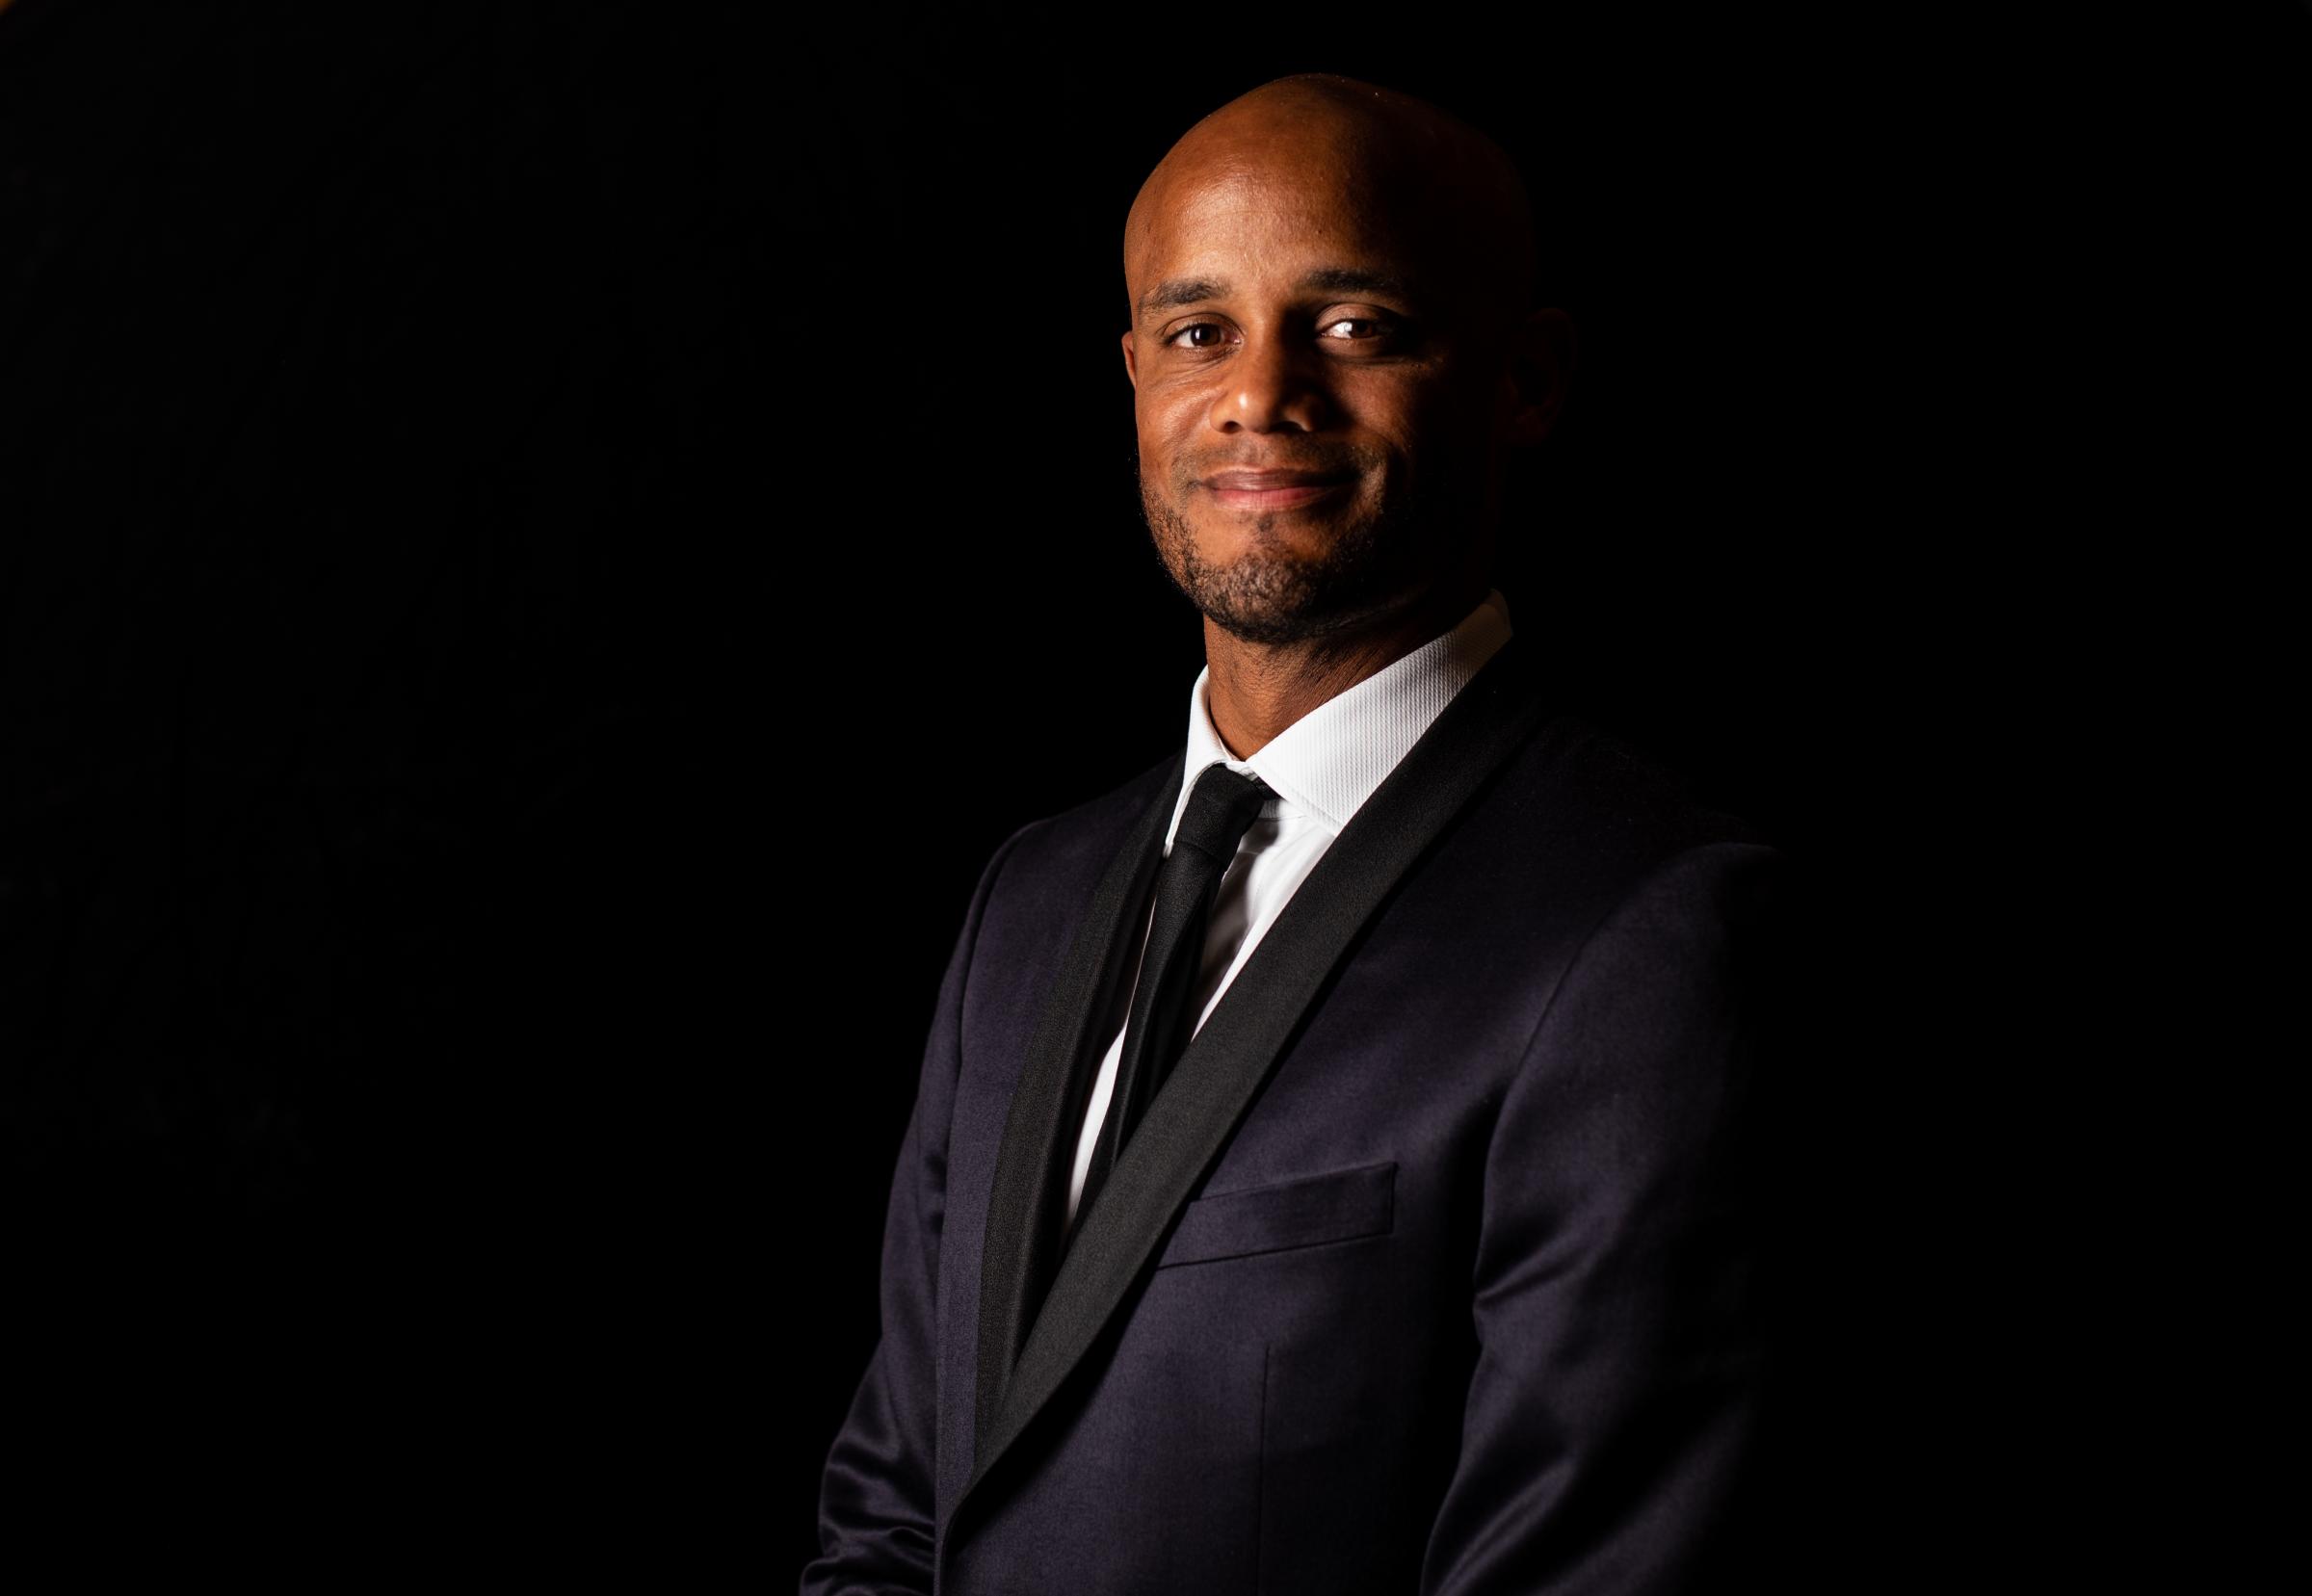 Burnley appoint Man City legend Vincent Kompany as their new manager